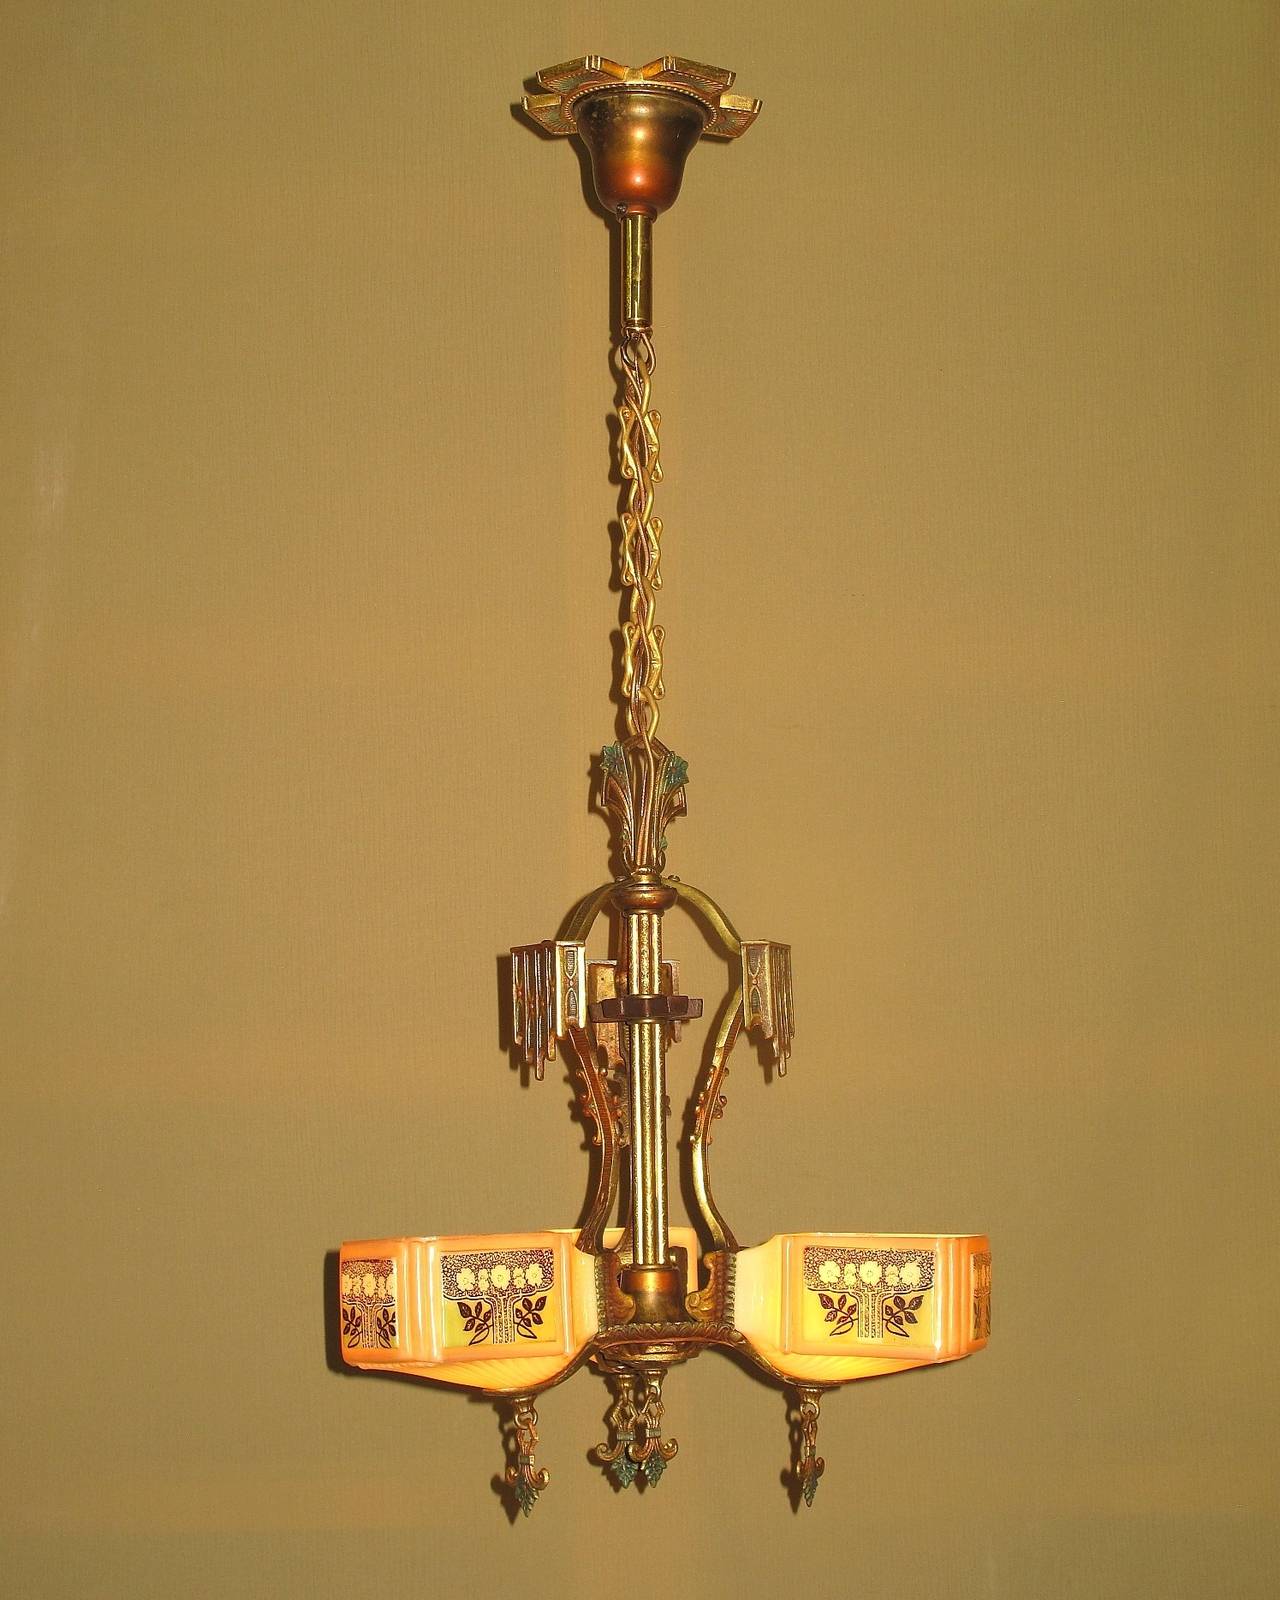 American Gill Three-Light Ceiling Fixture with Original Colors and Glass Shades, 1930